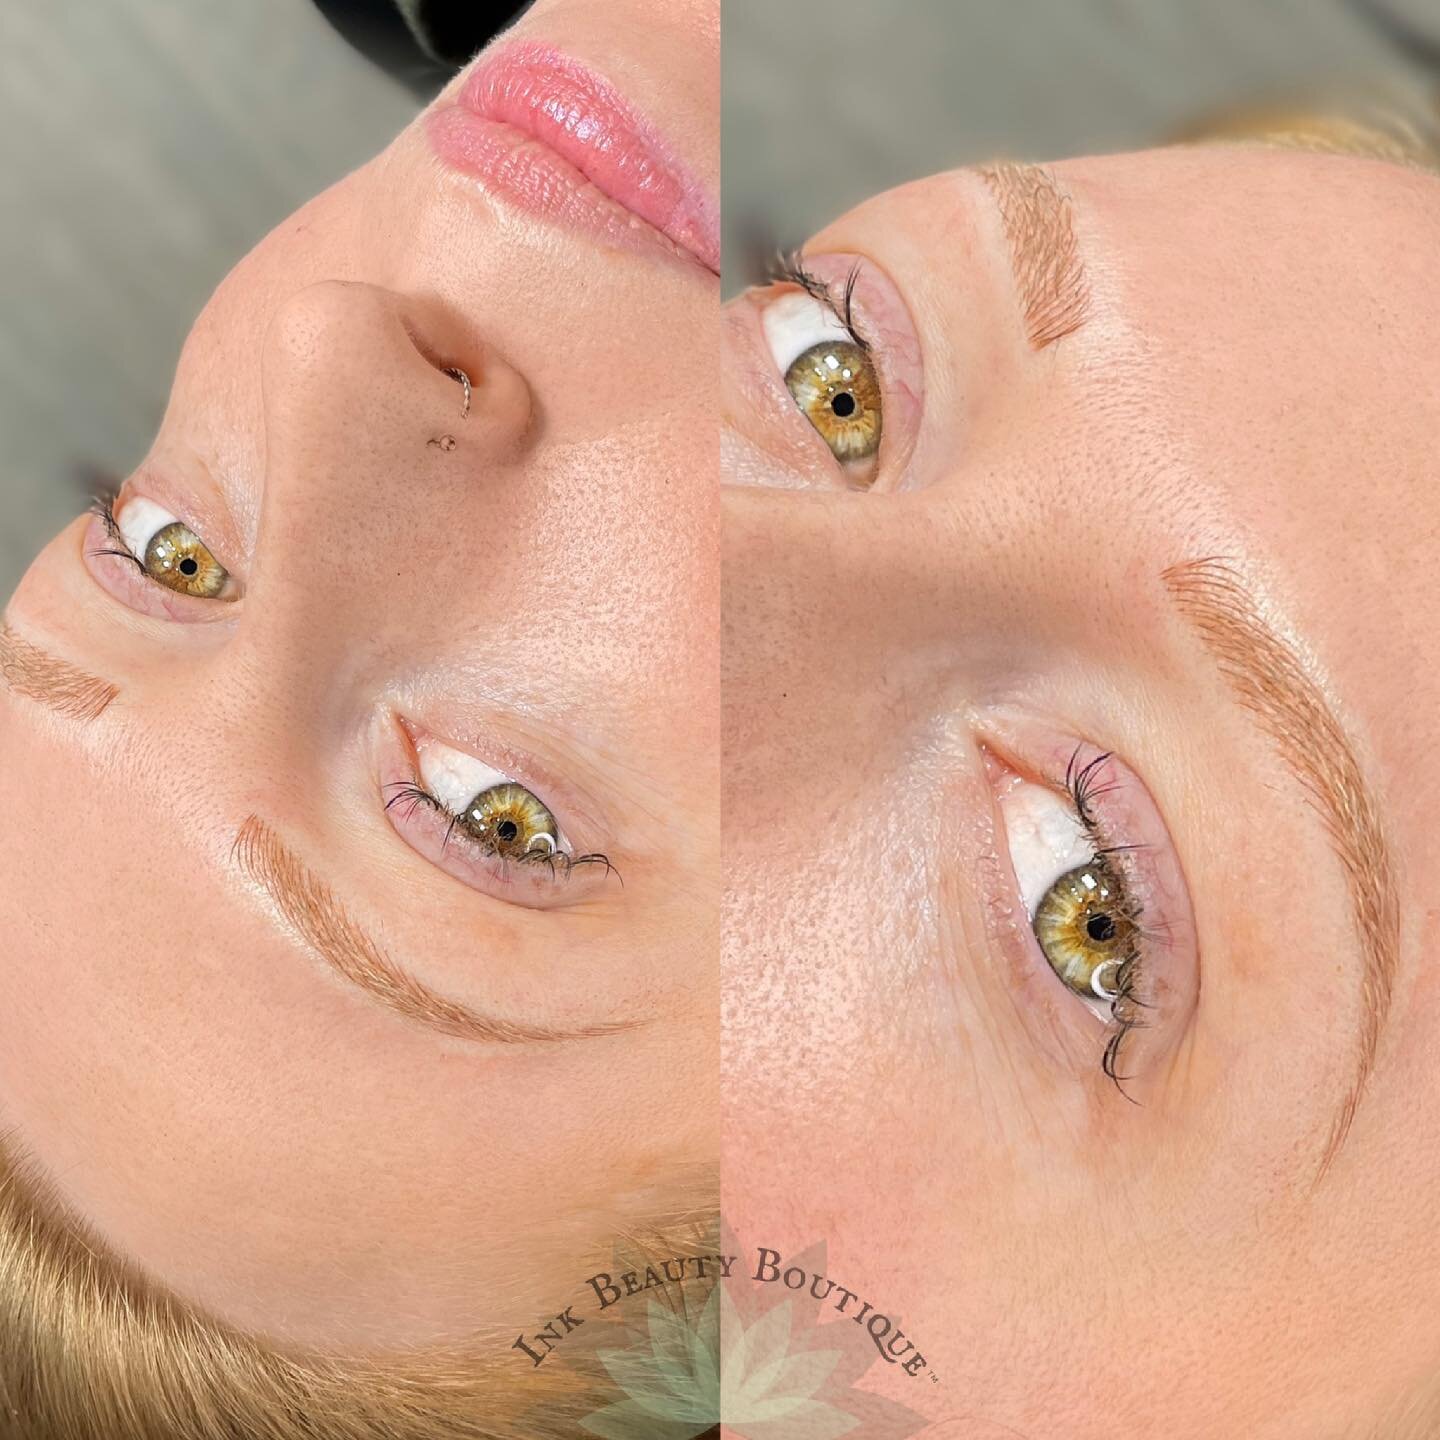 ❤️&zwj;🔥No need for a filter for this beauty ➕ brows fresh off the blade ❤️&zwj;🔥

You can book with me by clicking book now in my bio 🗓 I&rsquo;m here for you, DM or email me if you have any questions 😘

#portlandoregonbrows #pdxpermanentmakeup 